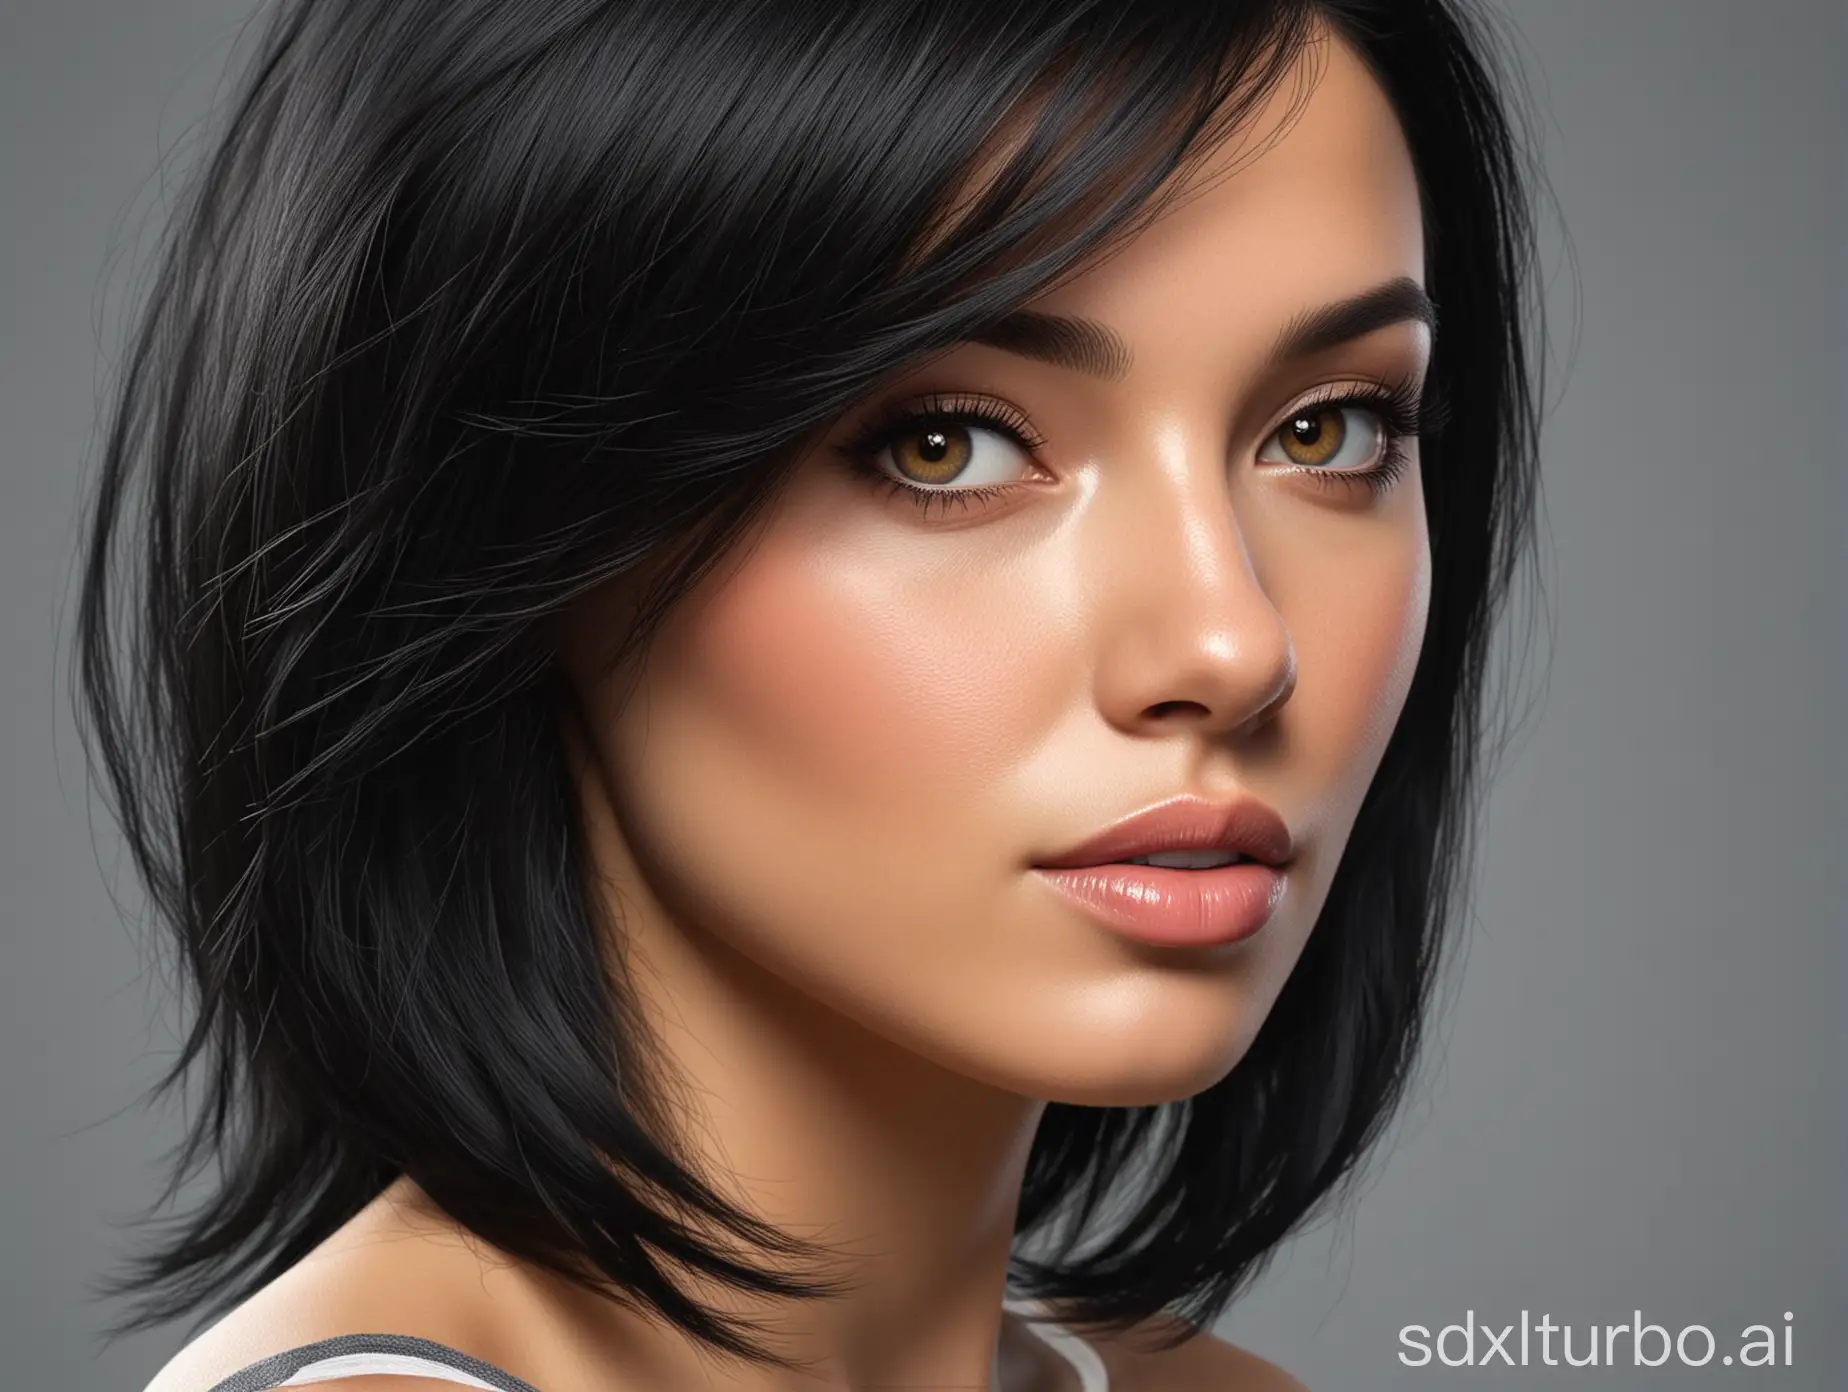 Hyperrealistic-Portrait-of-a-Flawless-European-Woman-with-Perfect-Black-Hair